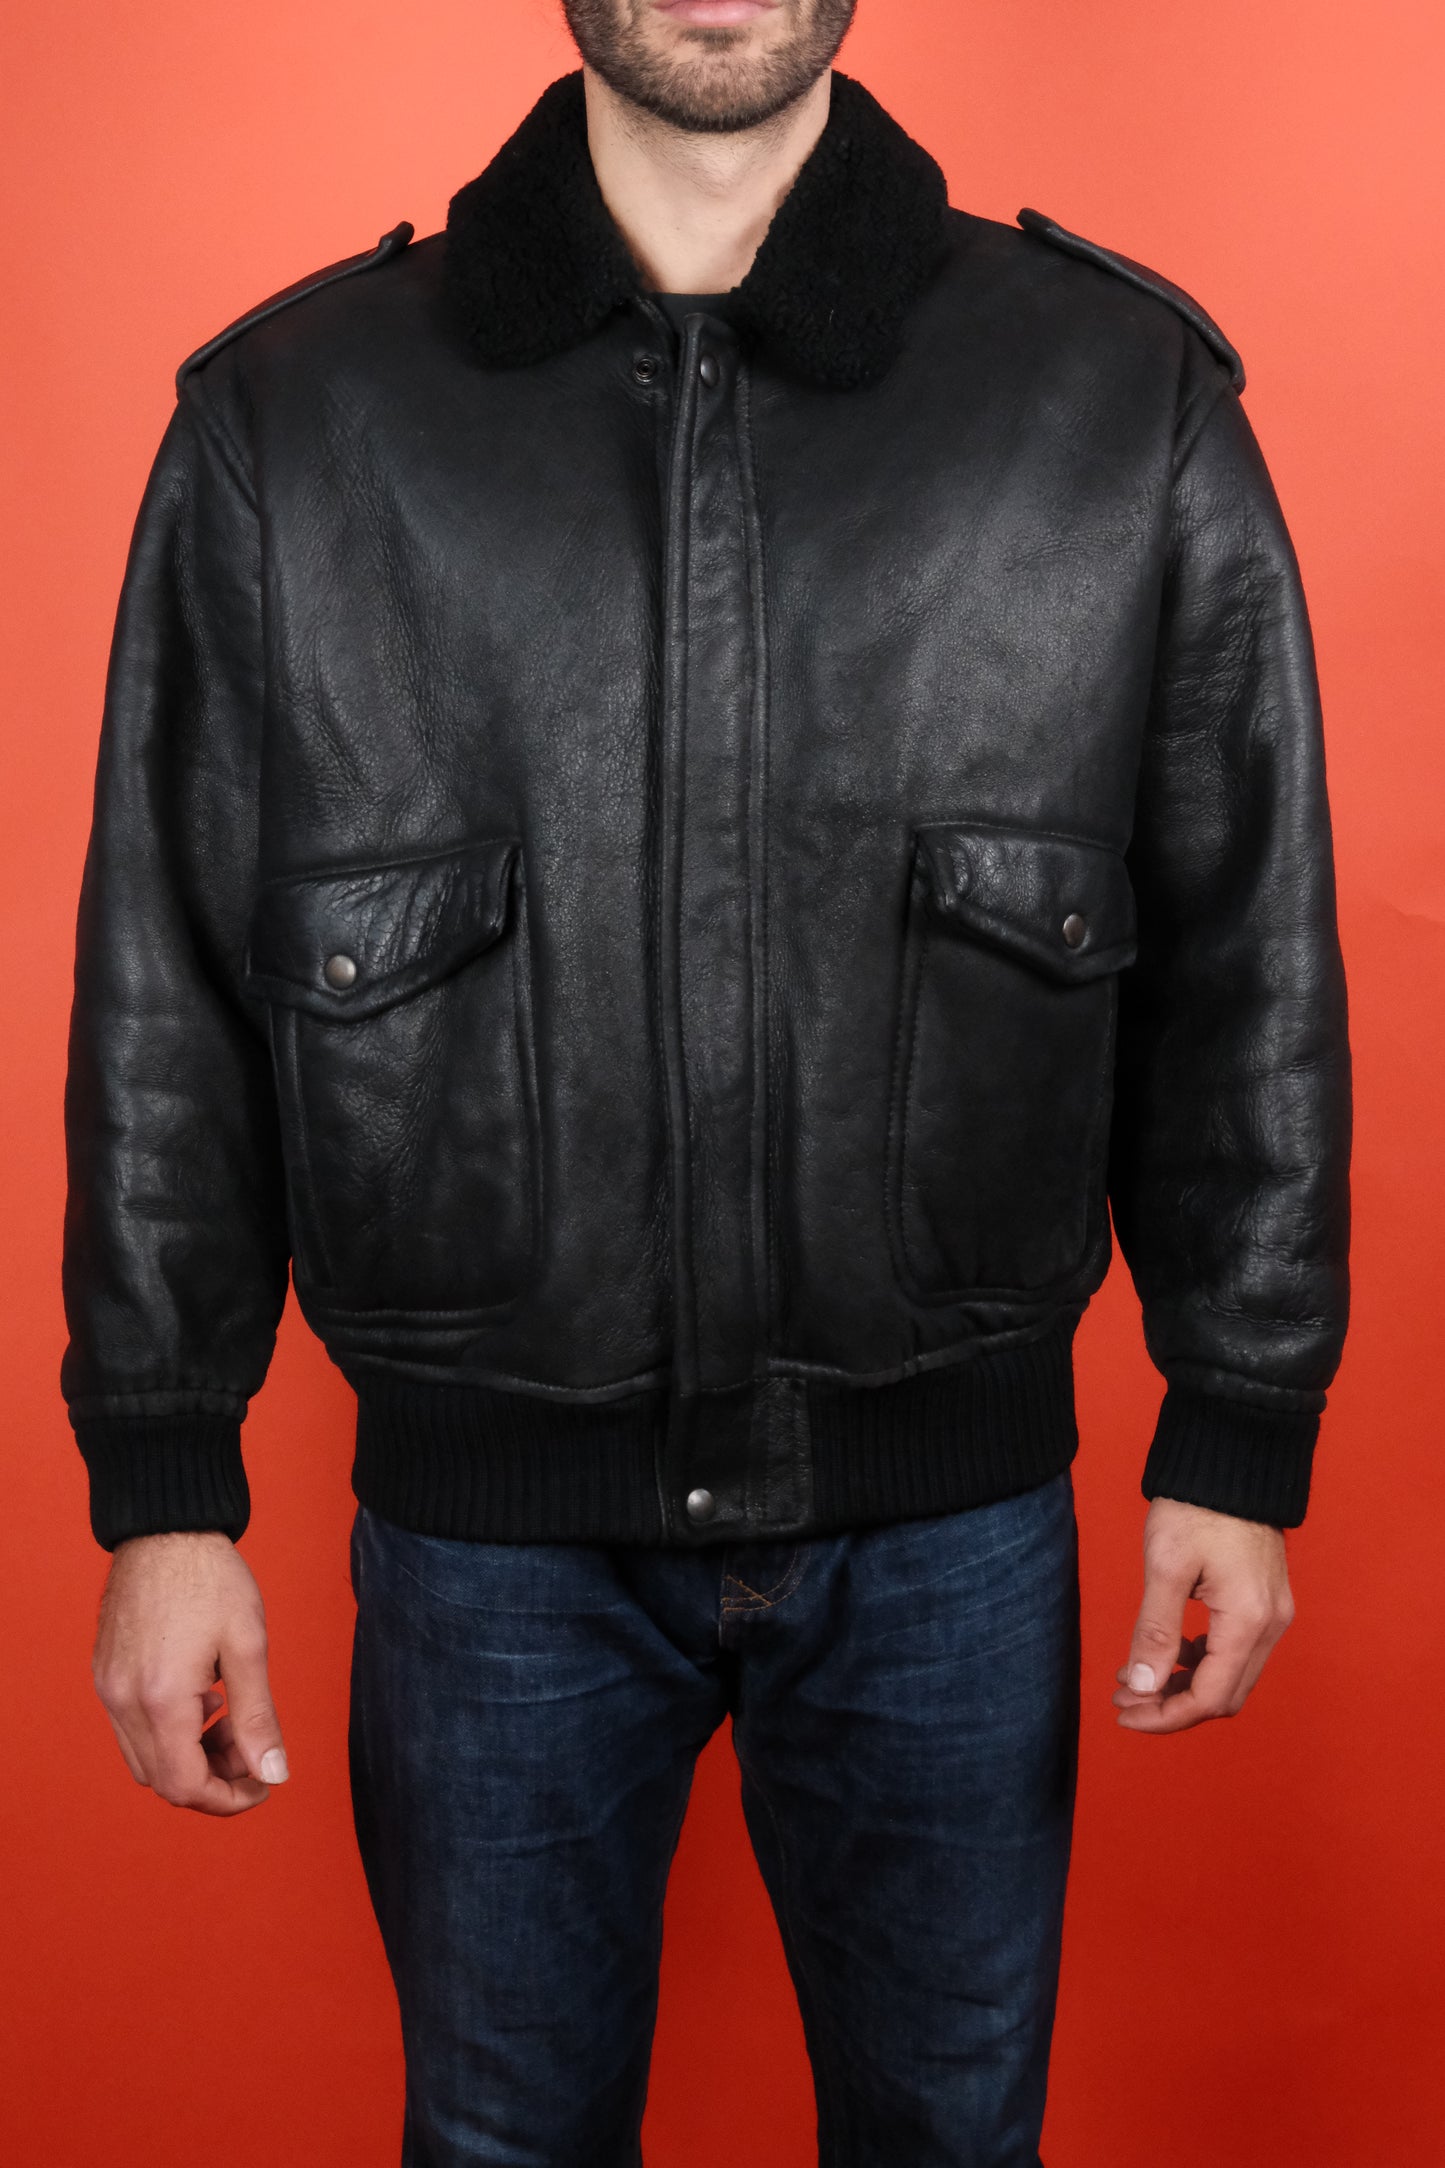 Shearling Leather Jacket Type A-2 'L/52' - vintage clothing clochard92.com